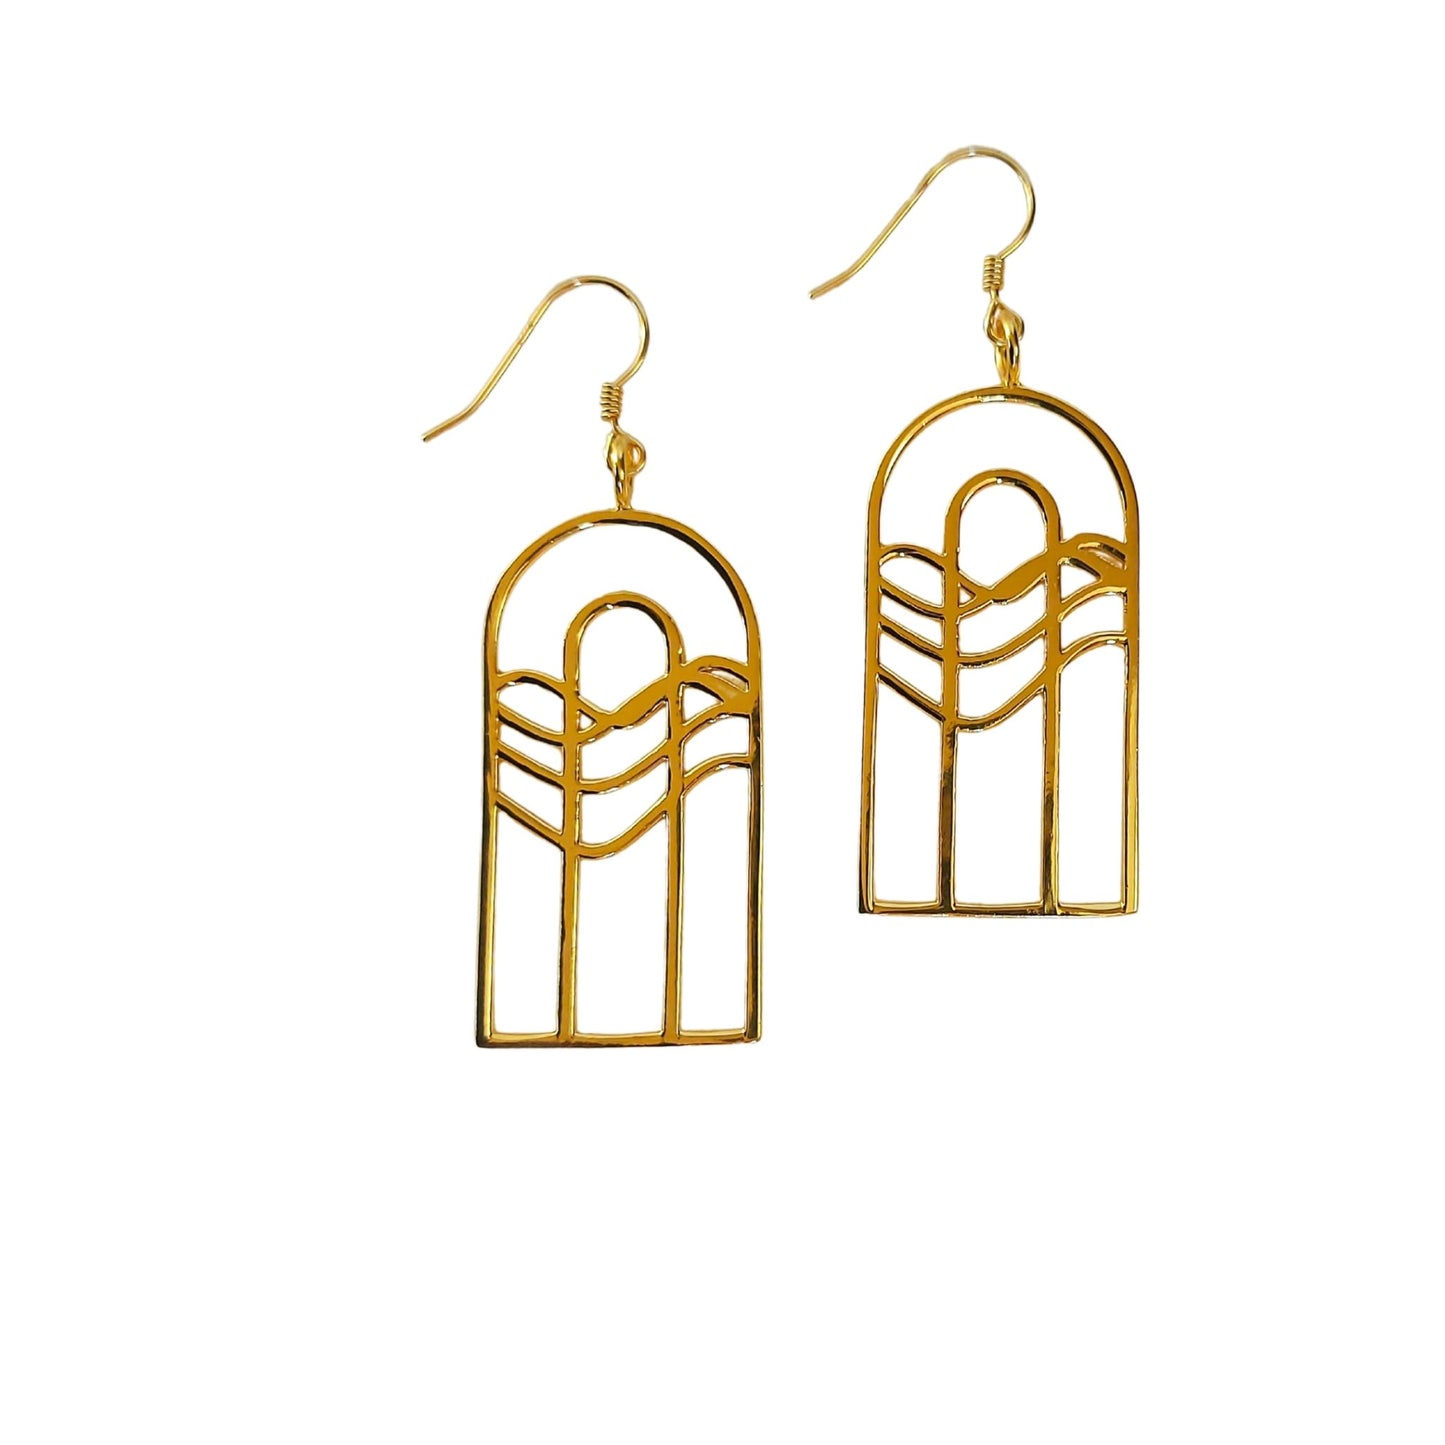 danlge earrings of gold plated concentric half stadiums with organic lines flowing down to the left.